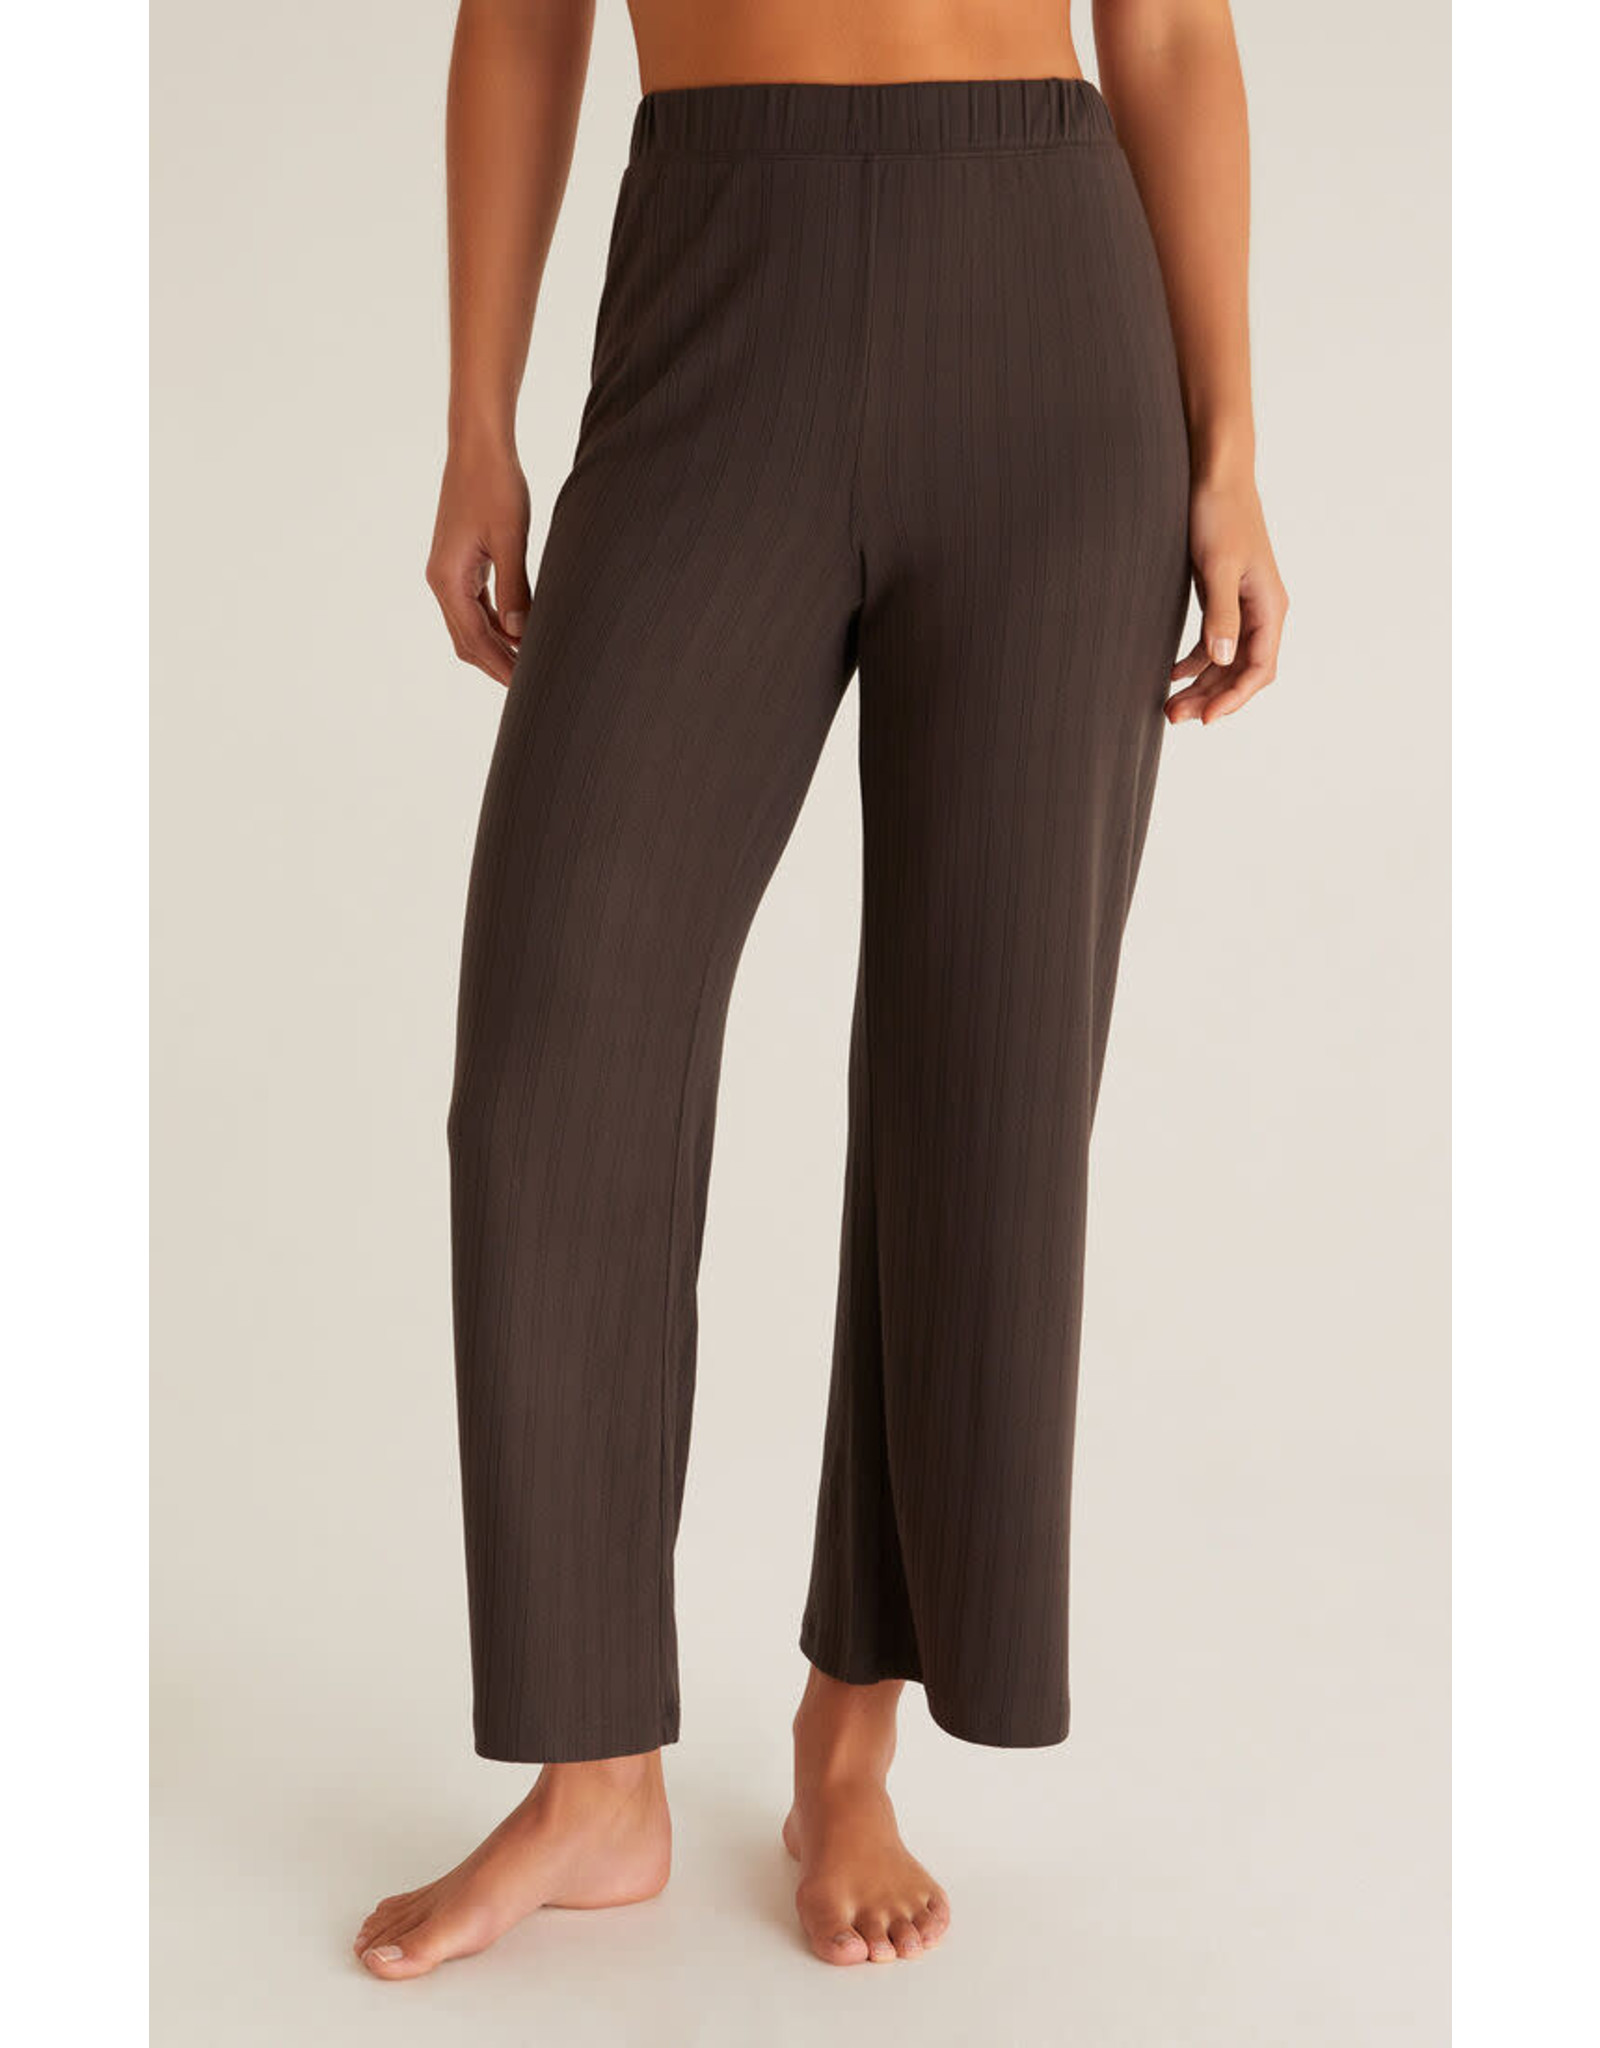 Z supply ZS Homebound Pointelle Pant